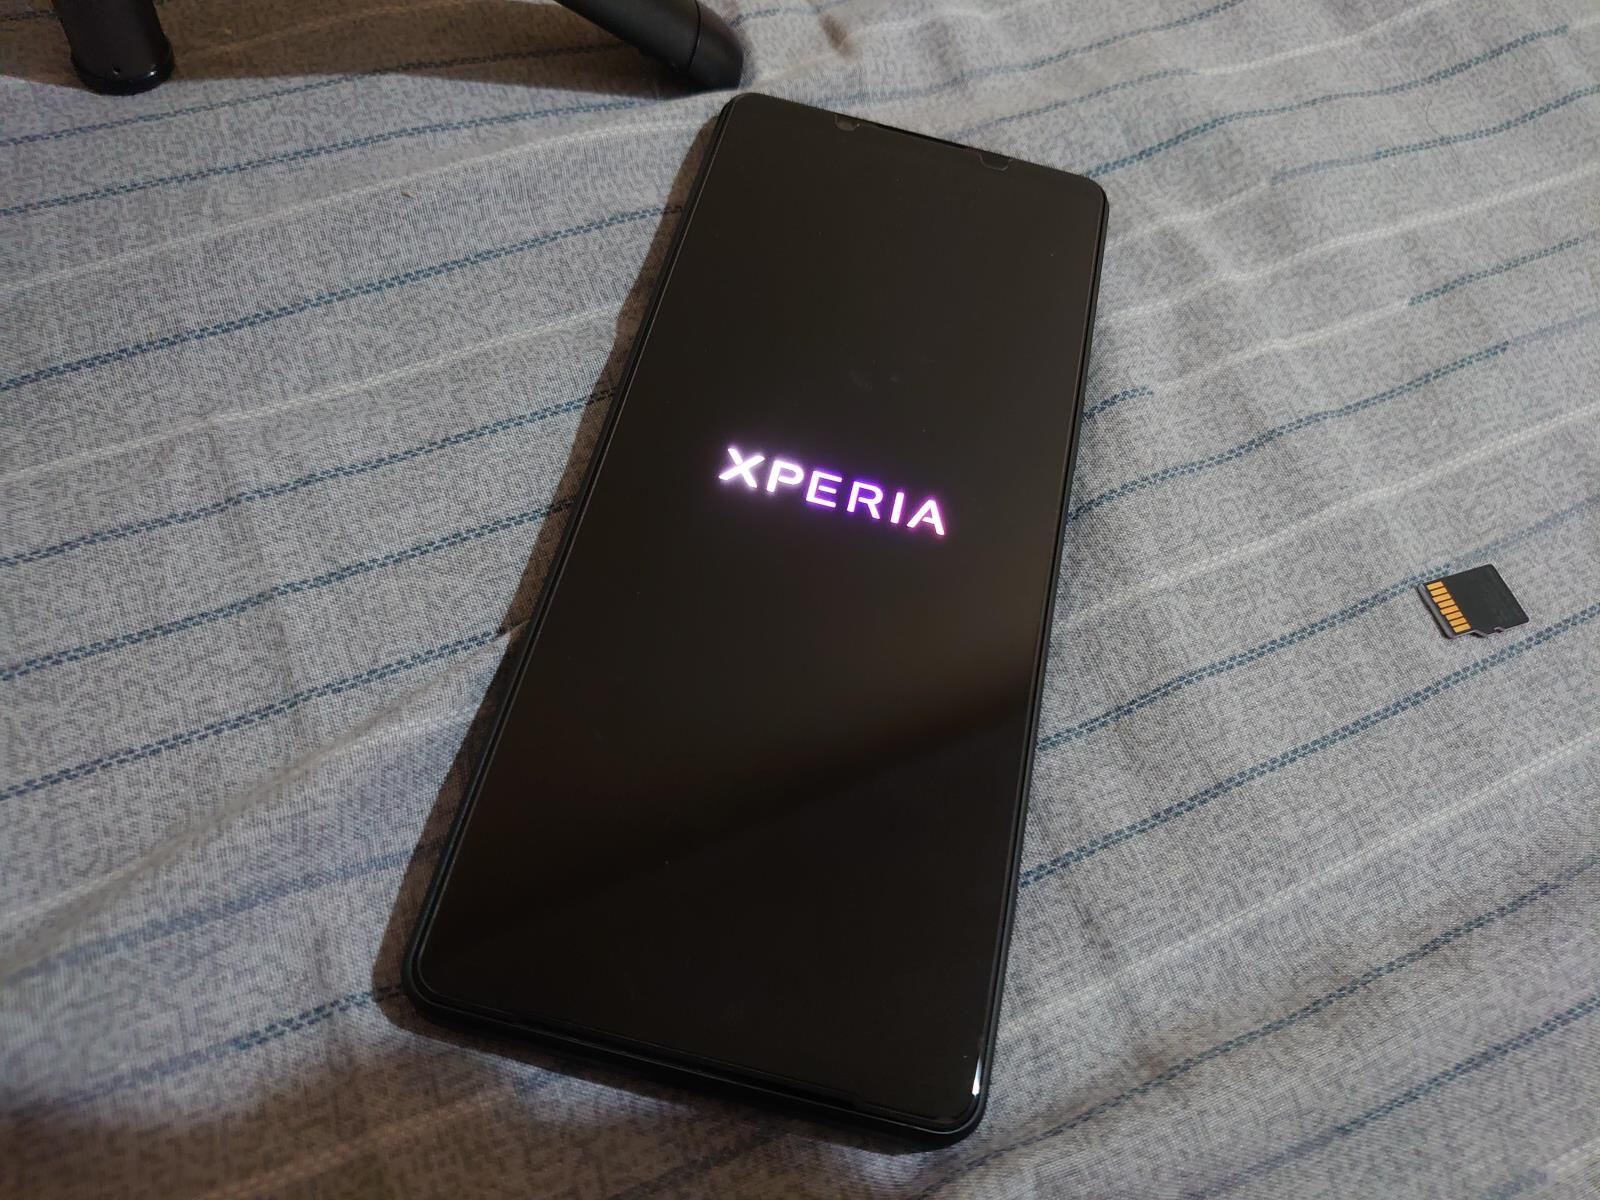 Initiating Recovery Mode Reboot On Sony Xperia: Step-by-Step